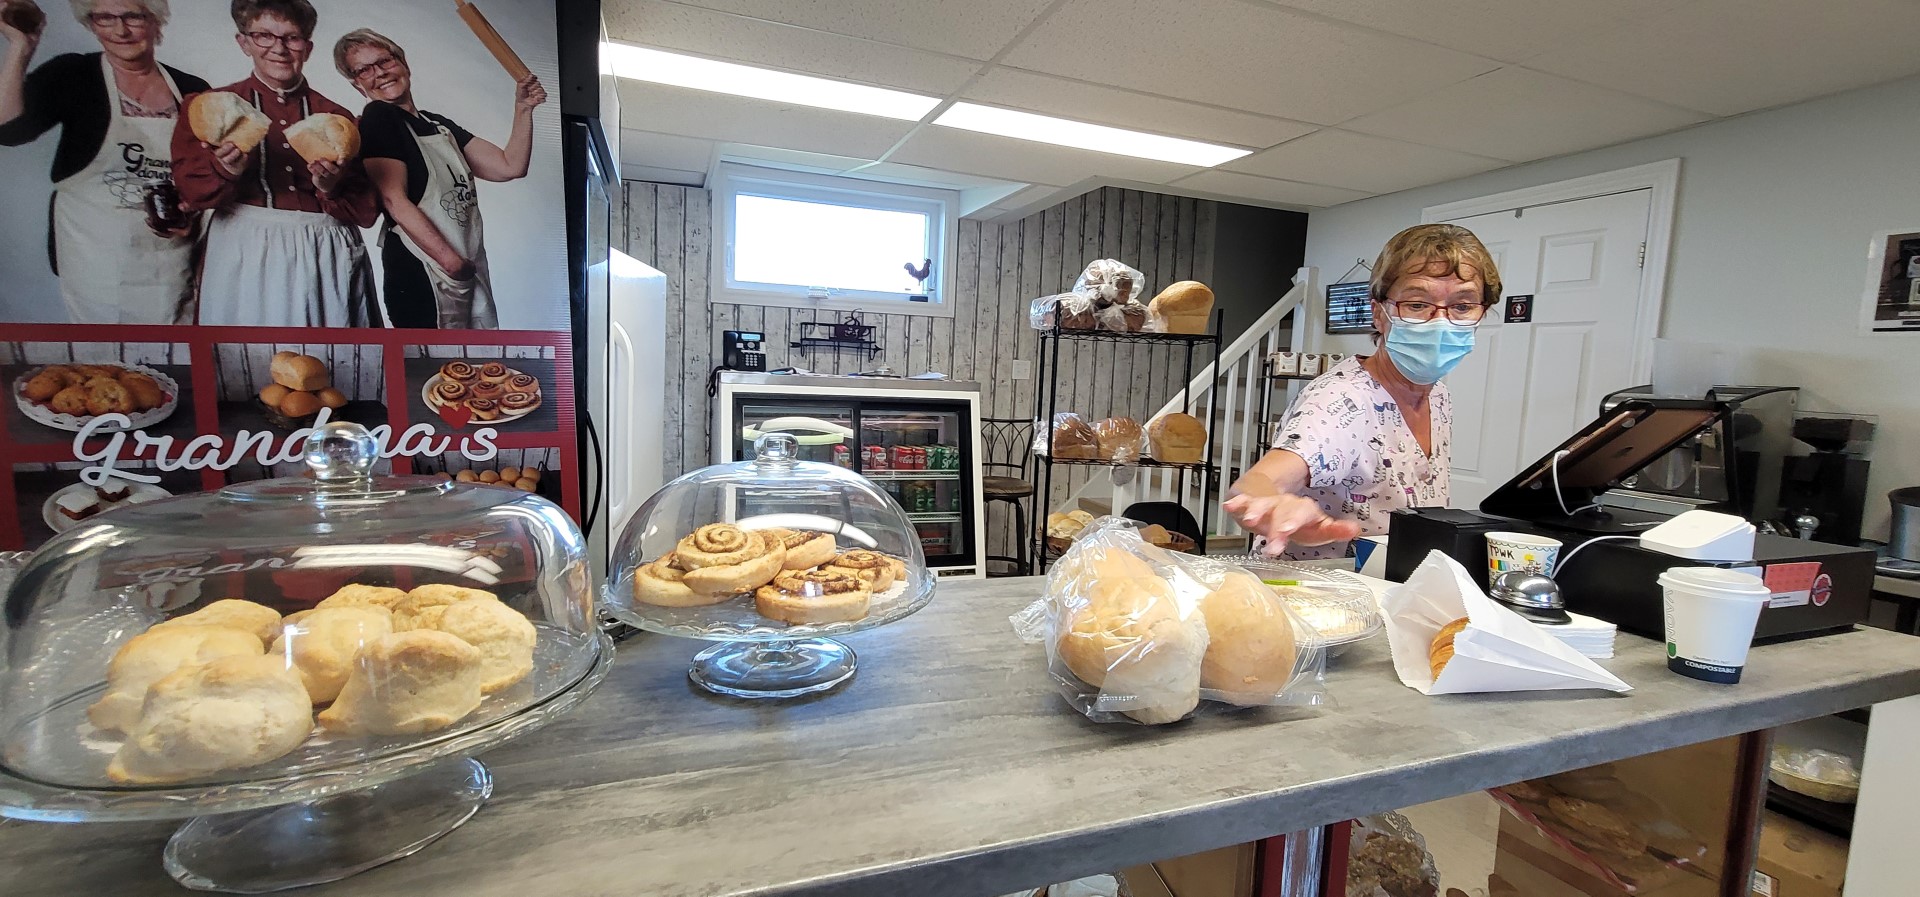 Inside of Bakery with owner reaching for baked goods